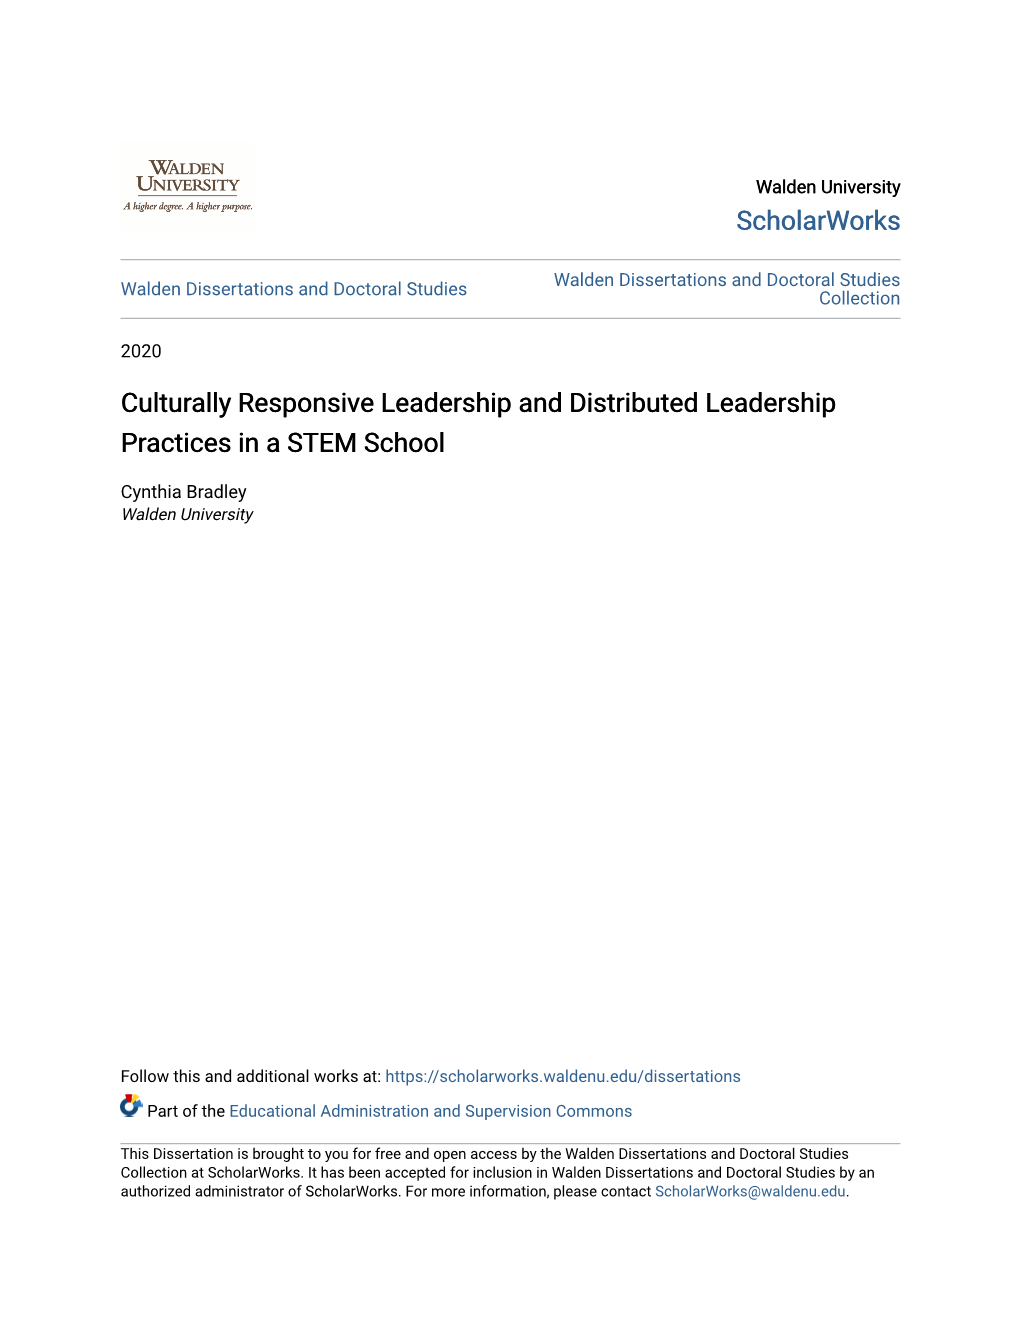 Culturally Responsive Leadership and Distributed Leadership Practices in a STEM School